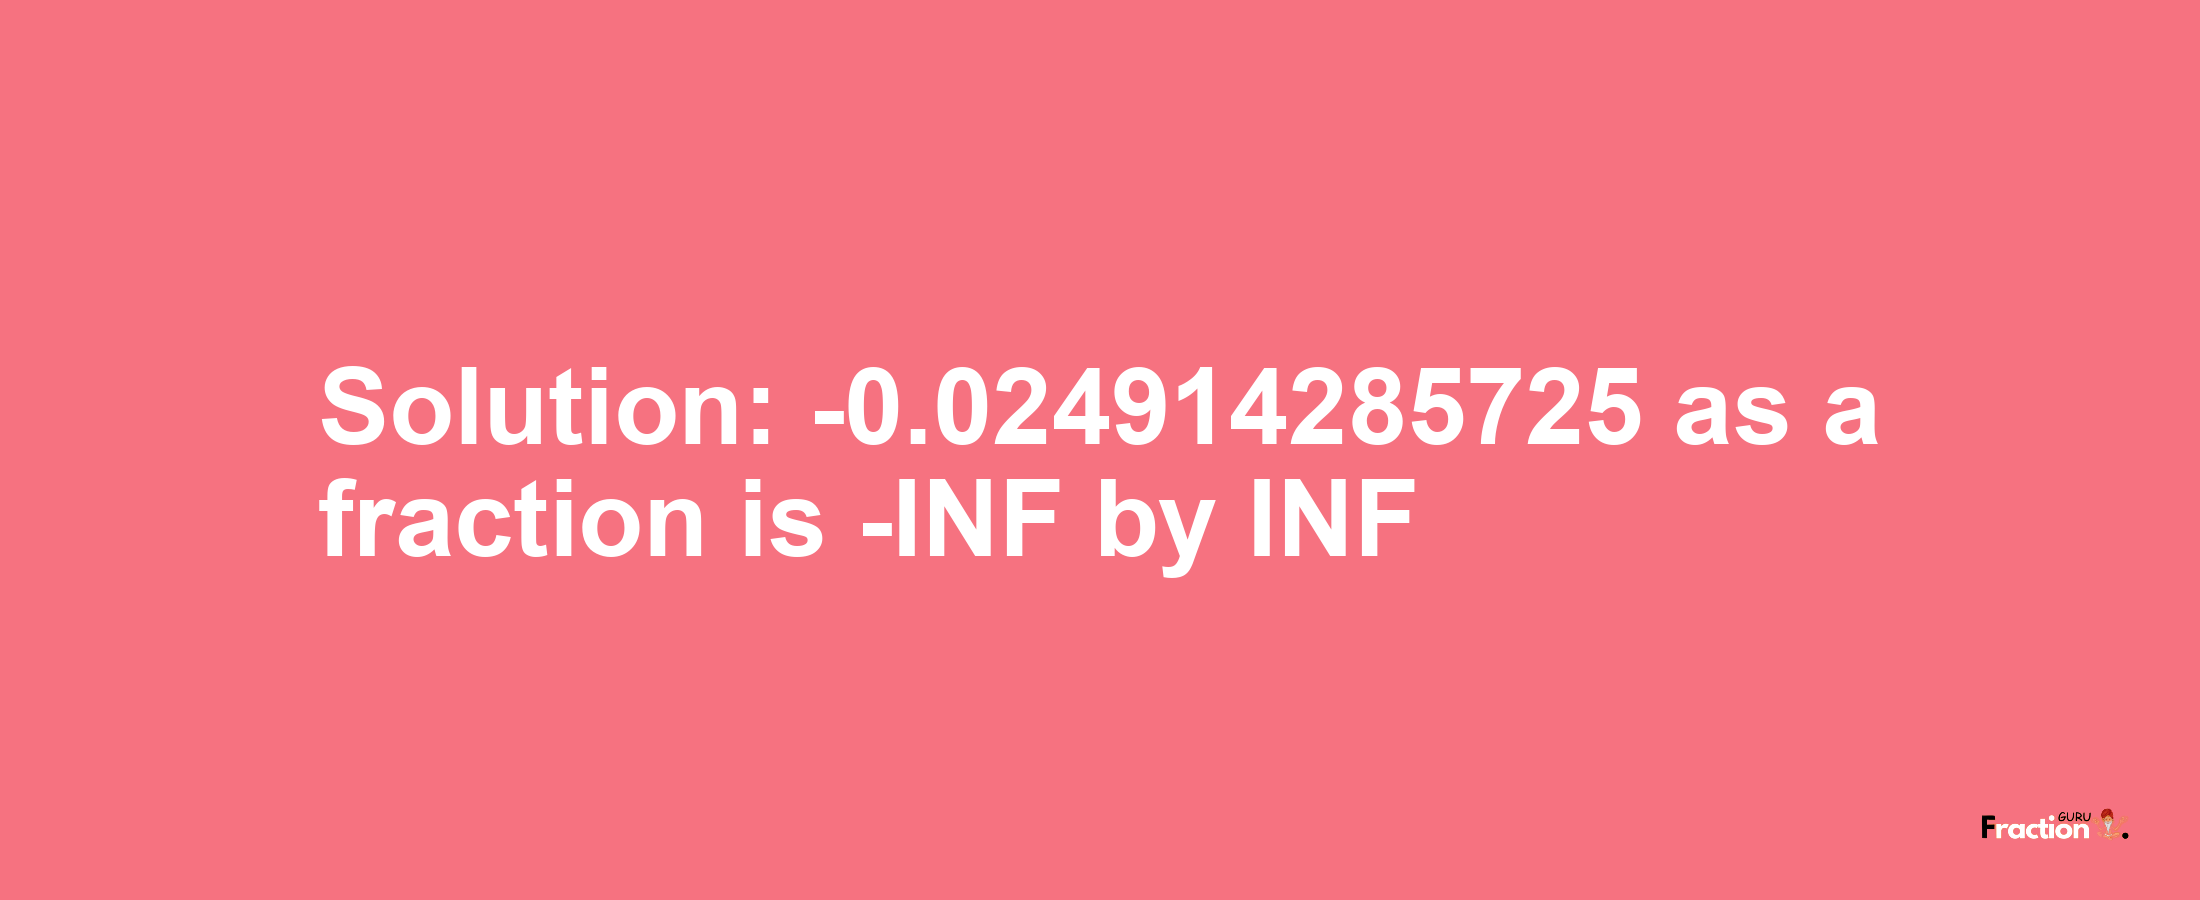 Solution:-0.024914285725 as a fraction is -INF/INF